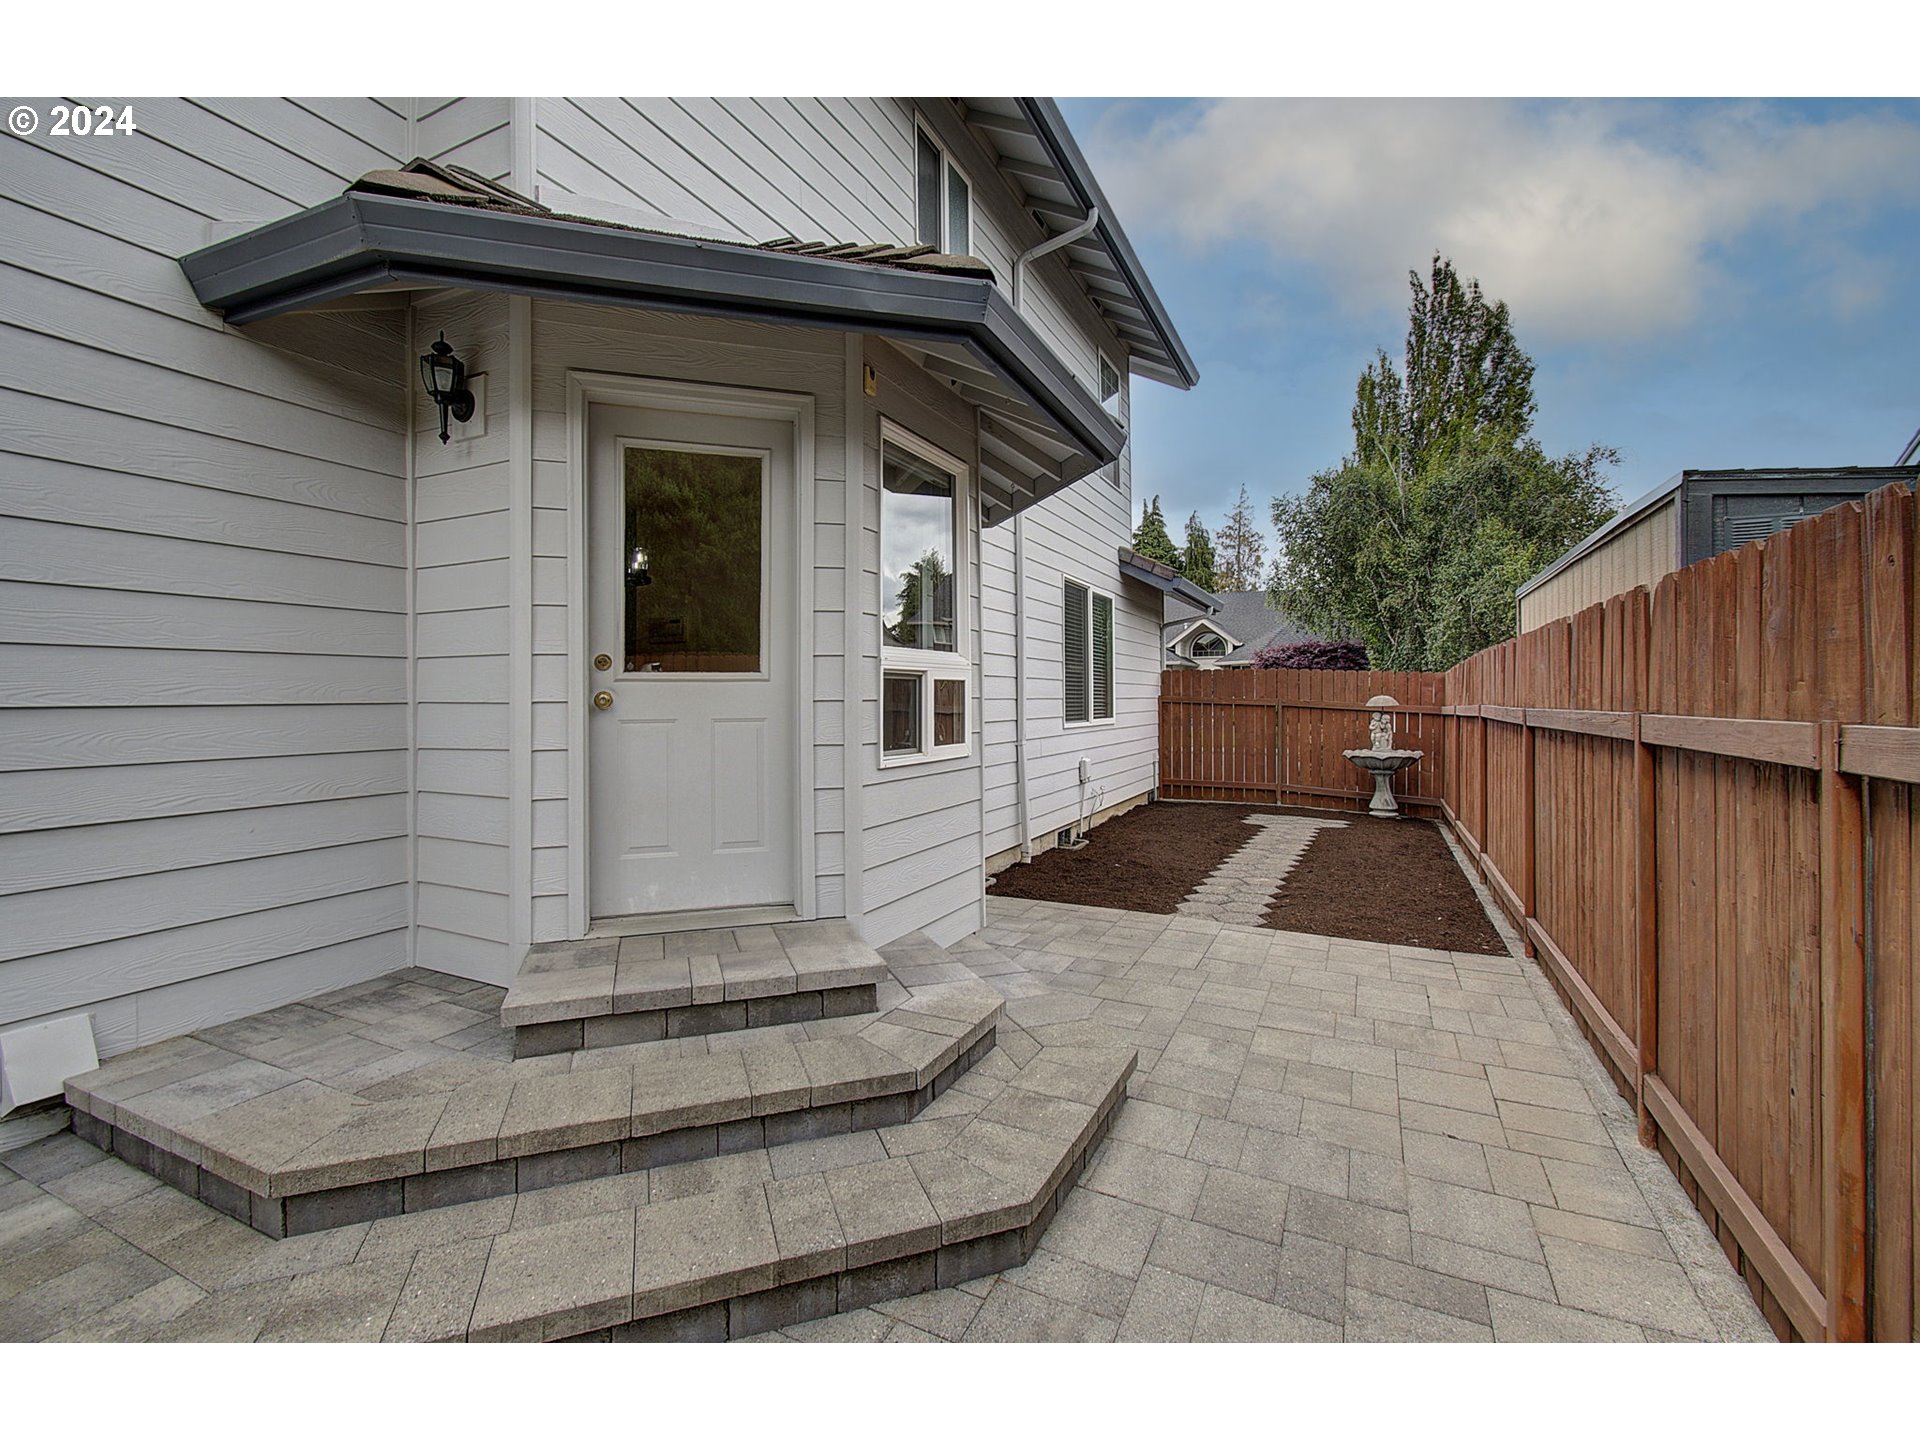 2707 NW 118th St, Vancouver, WA 98685